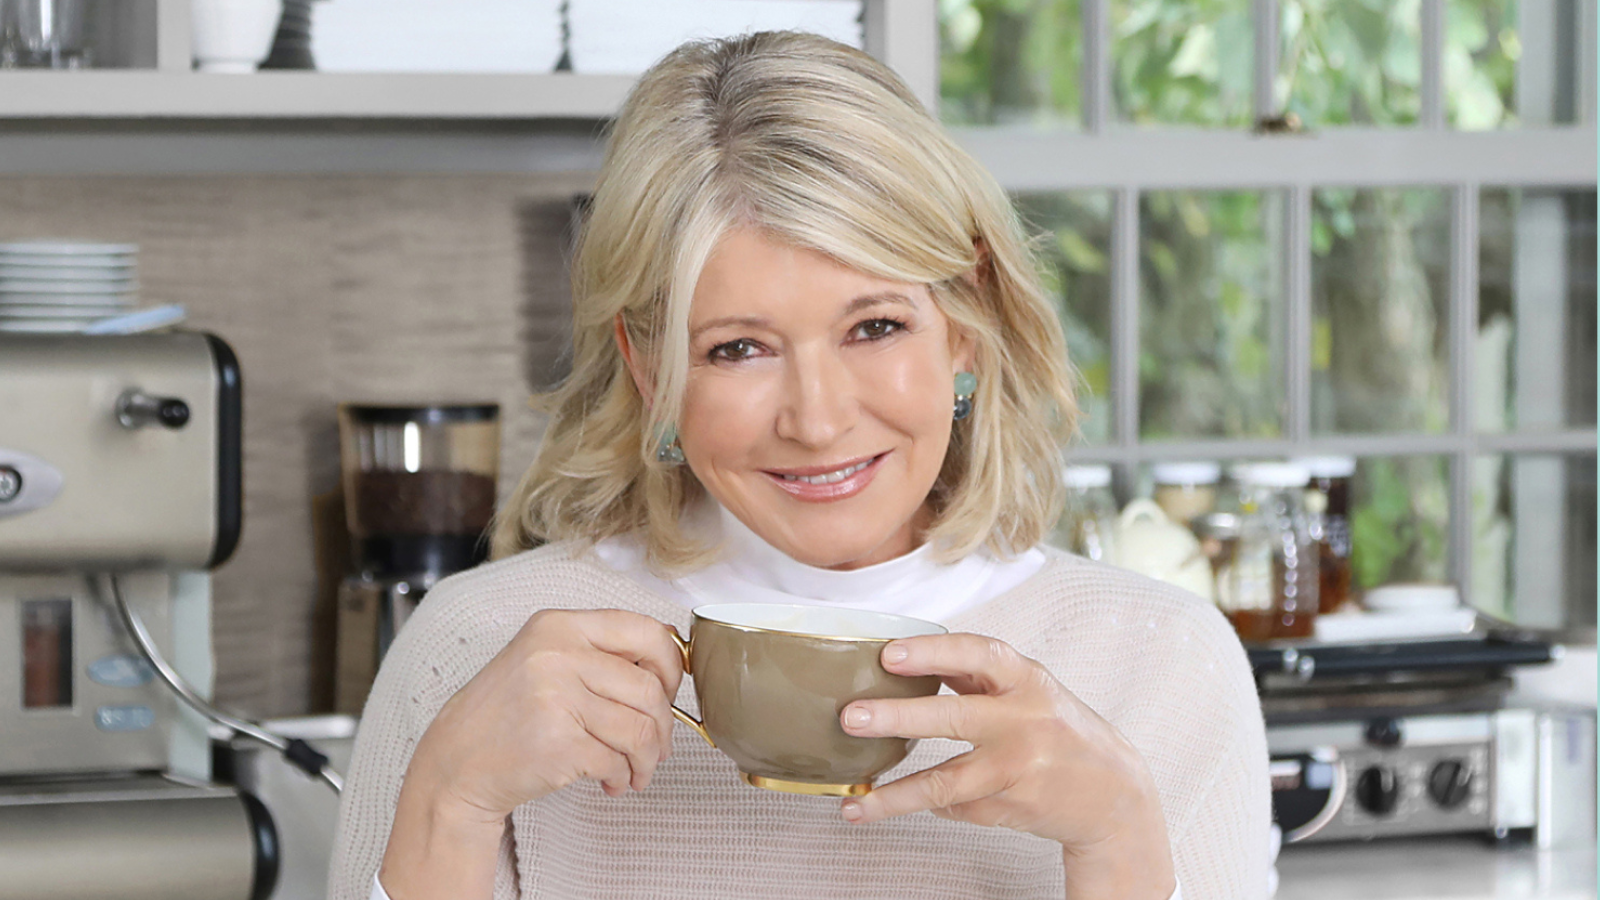 Is Now the Destination to Design Your Home Like Martha Stewart